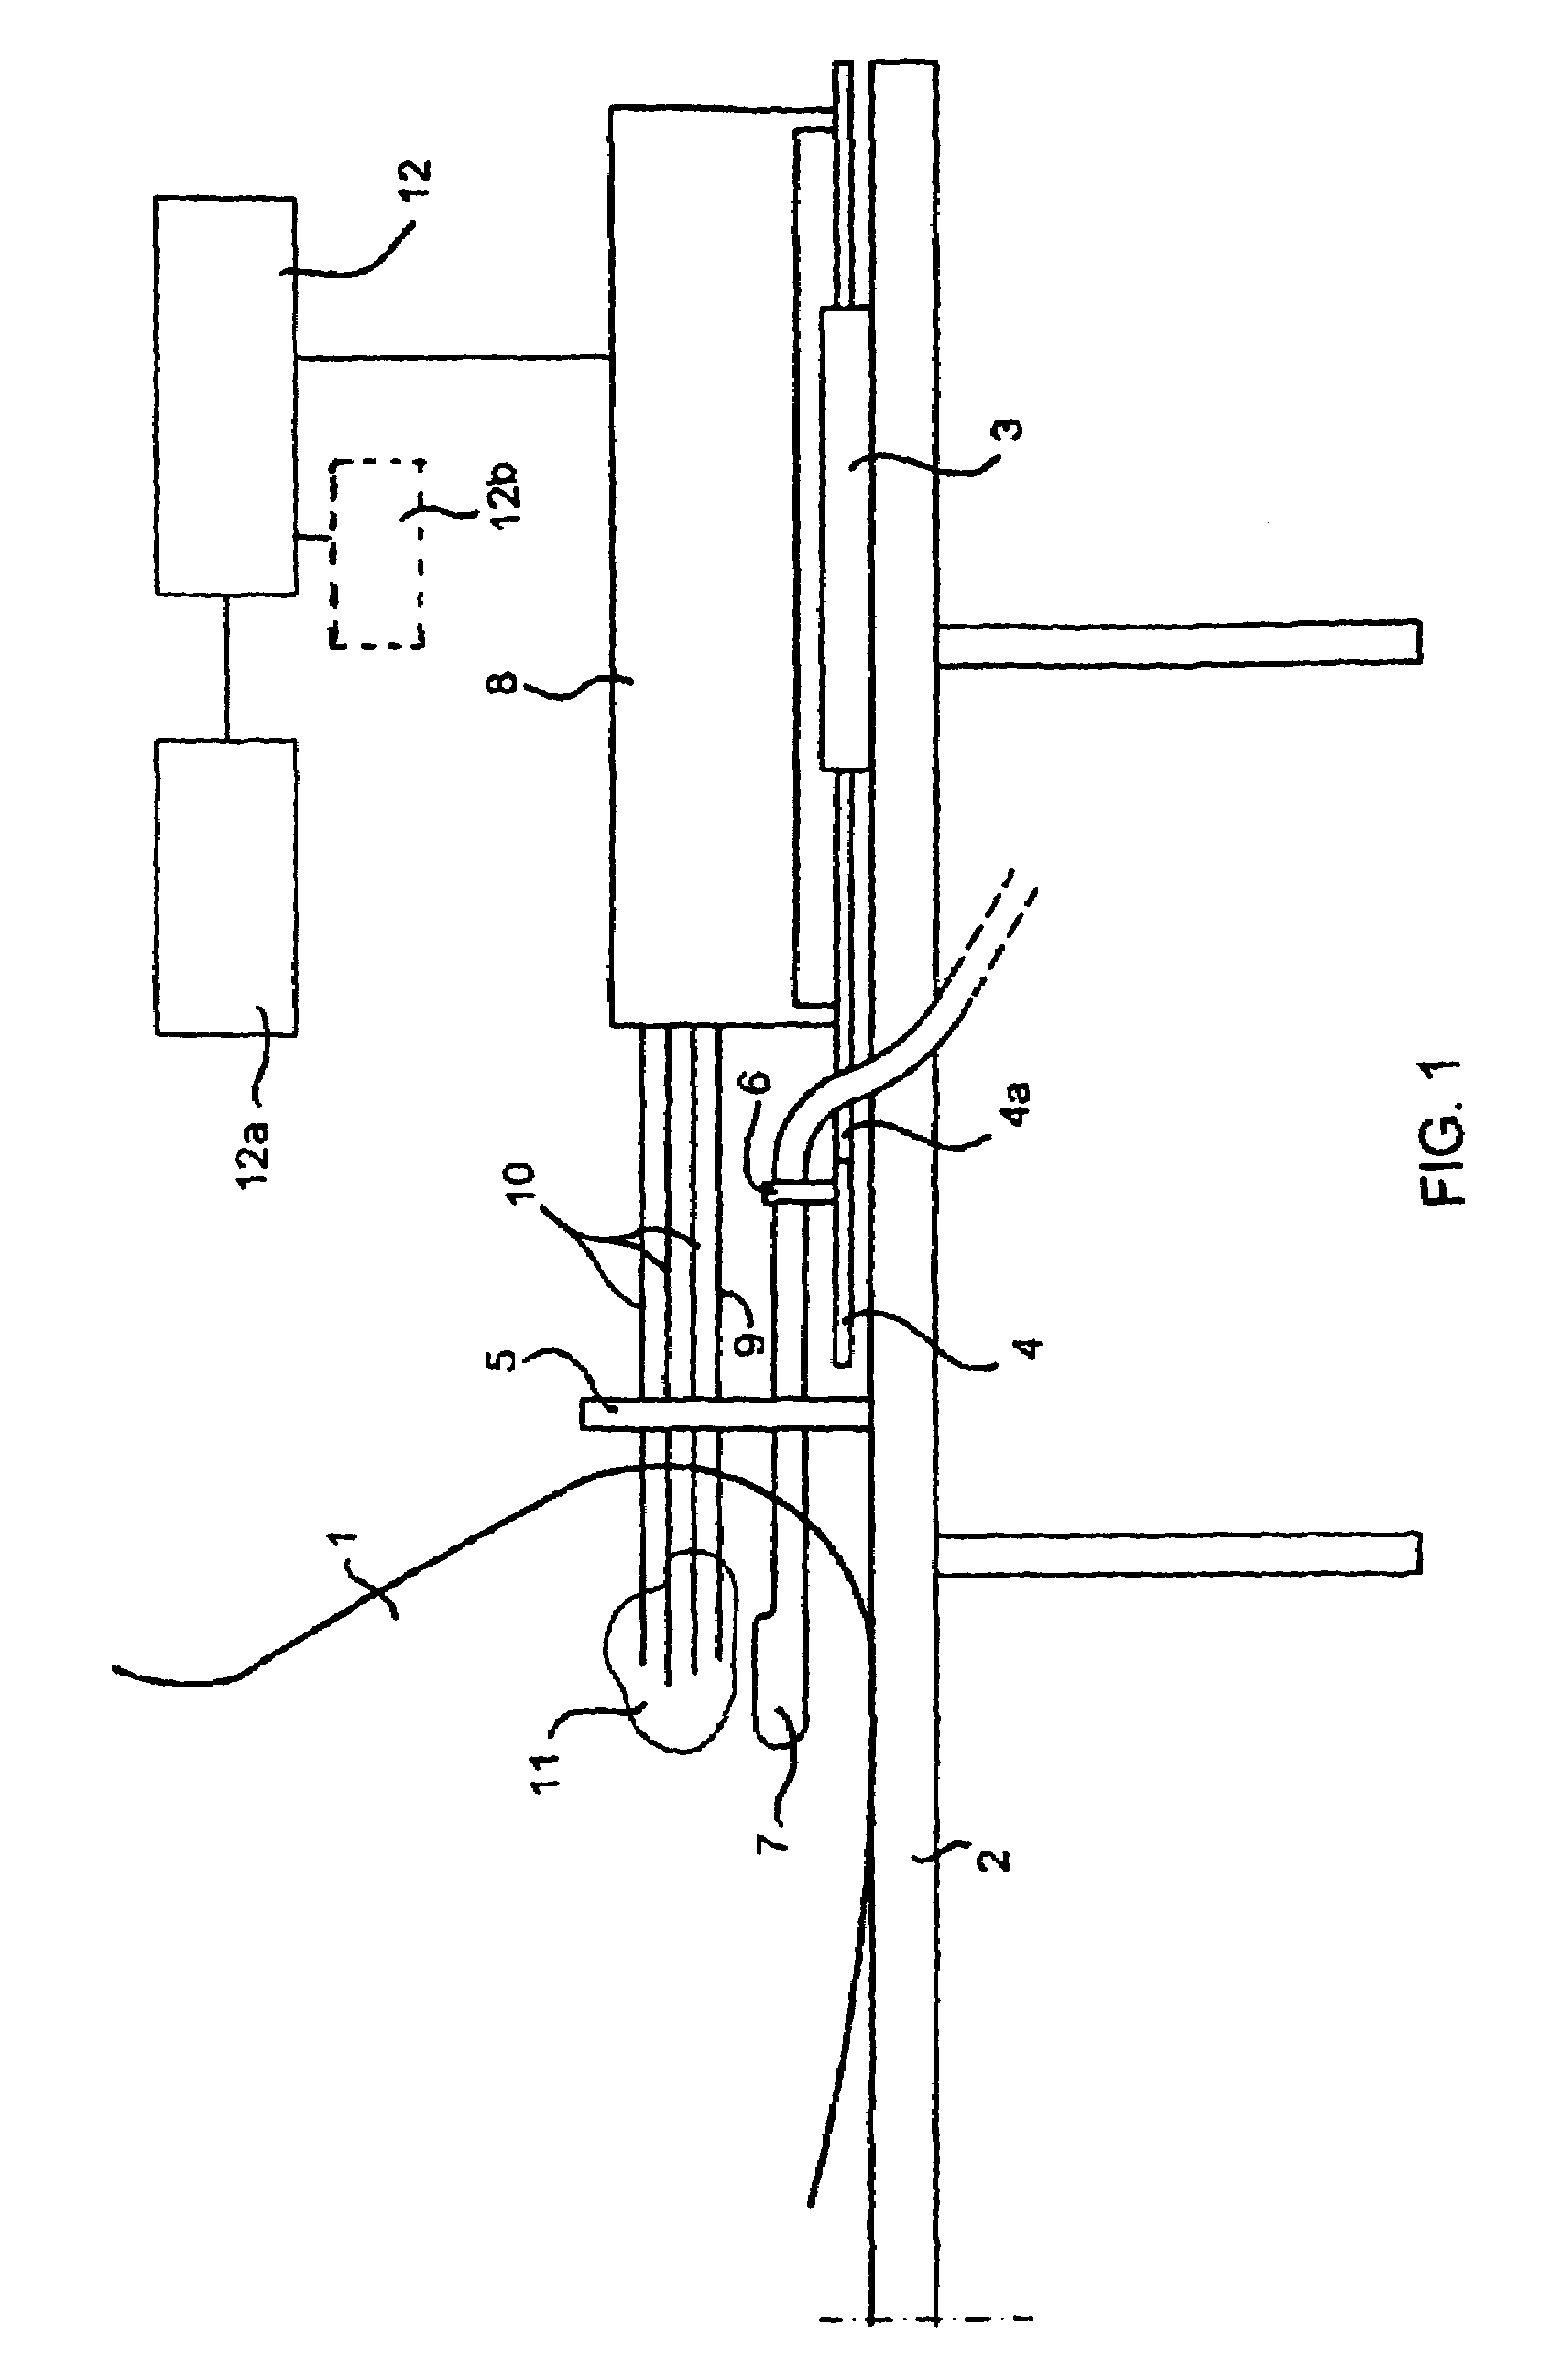 Device for implanting a row of radioactive seeds and non-radioactive spacers in an animal body